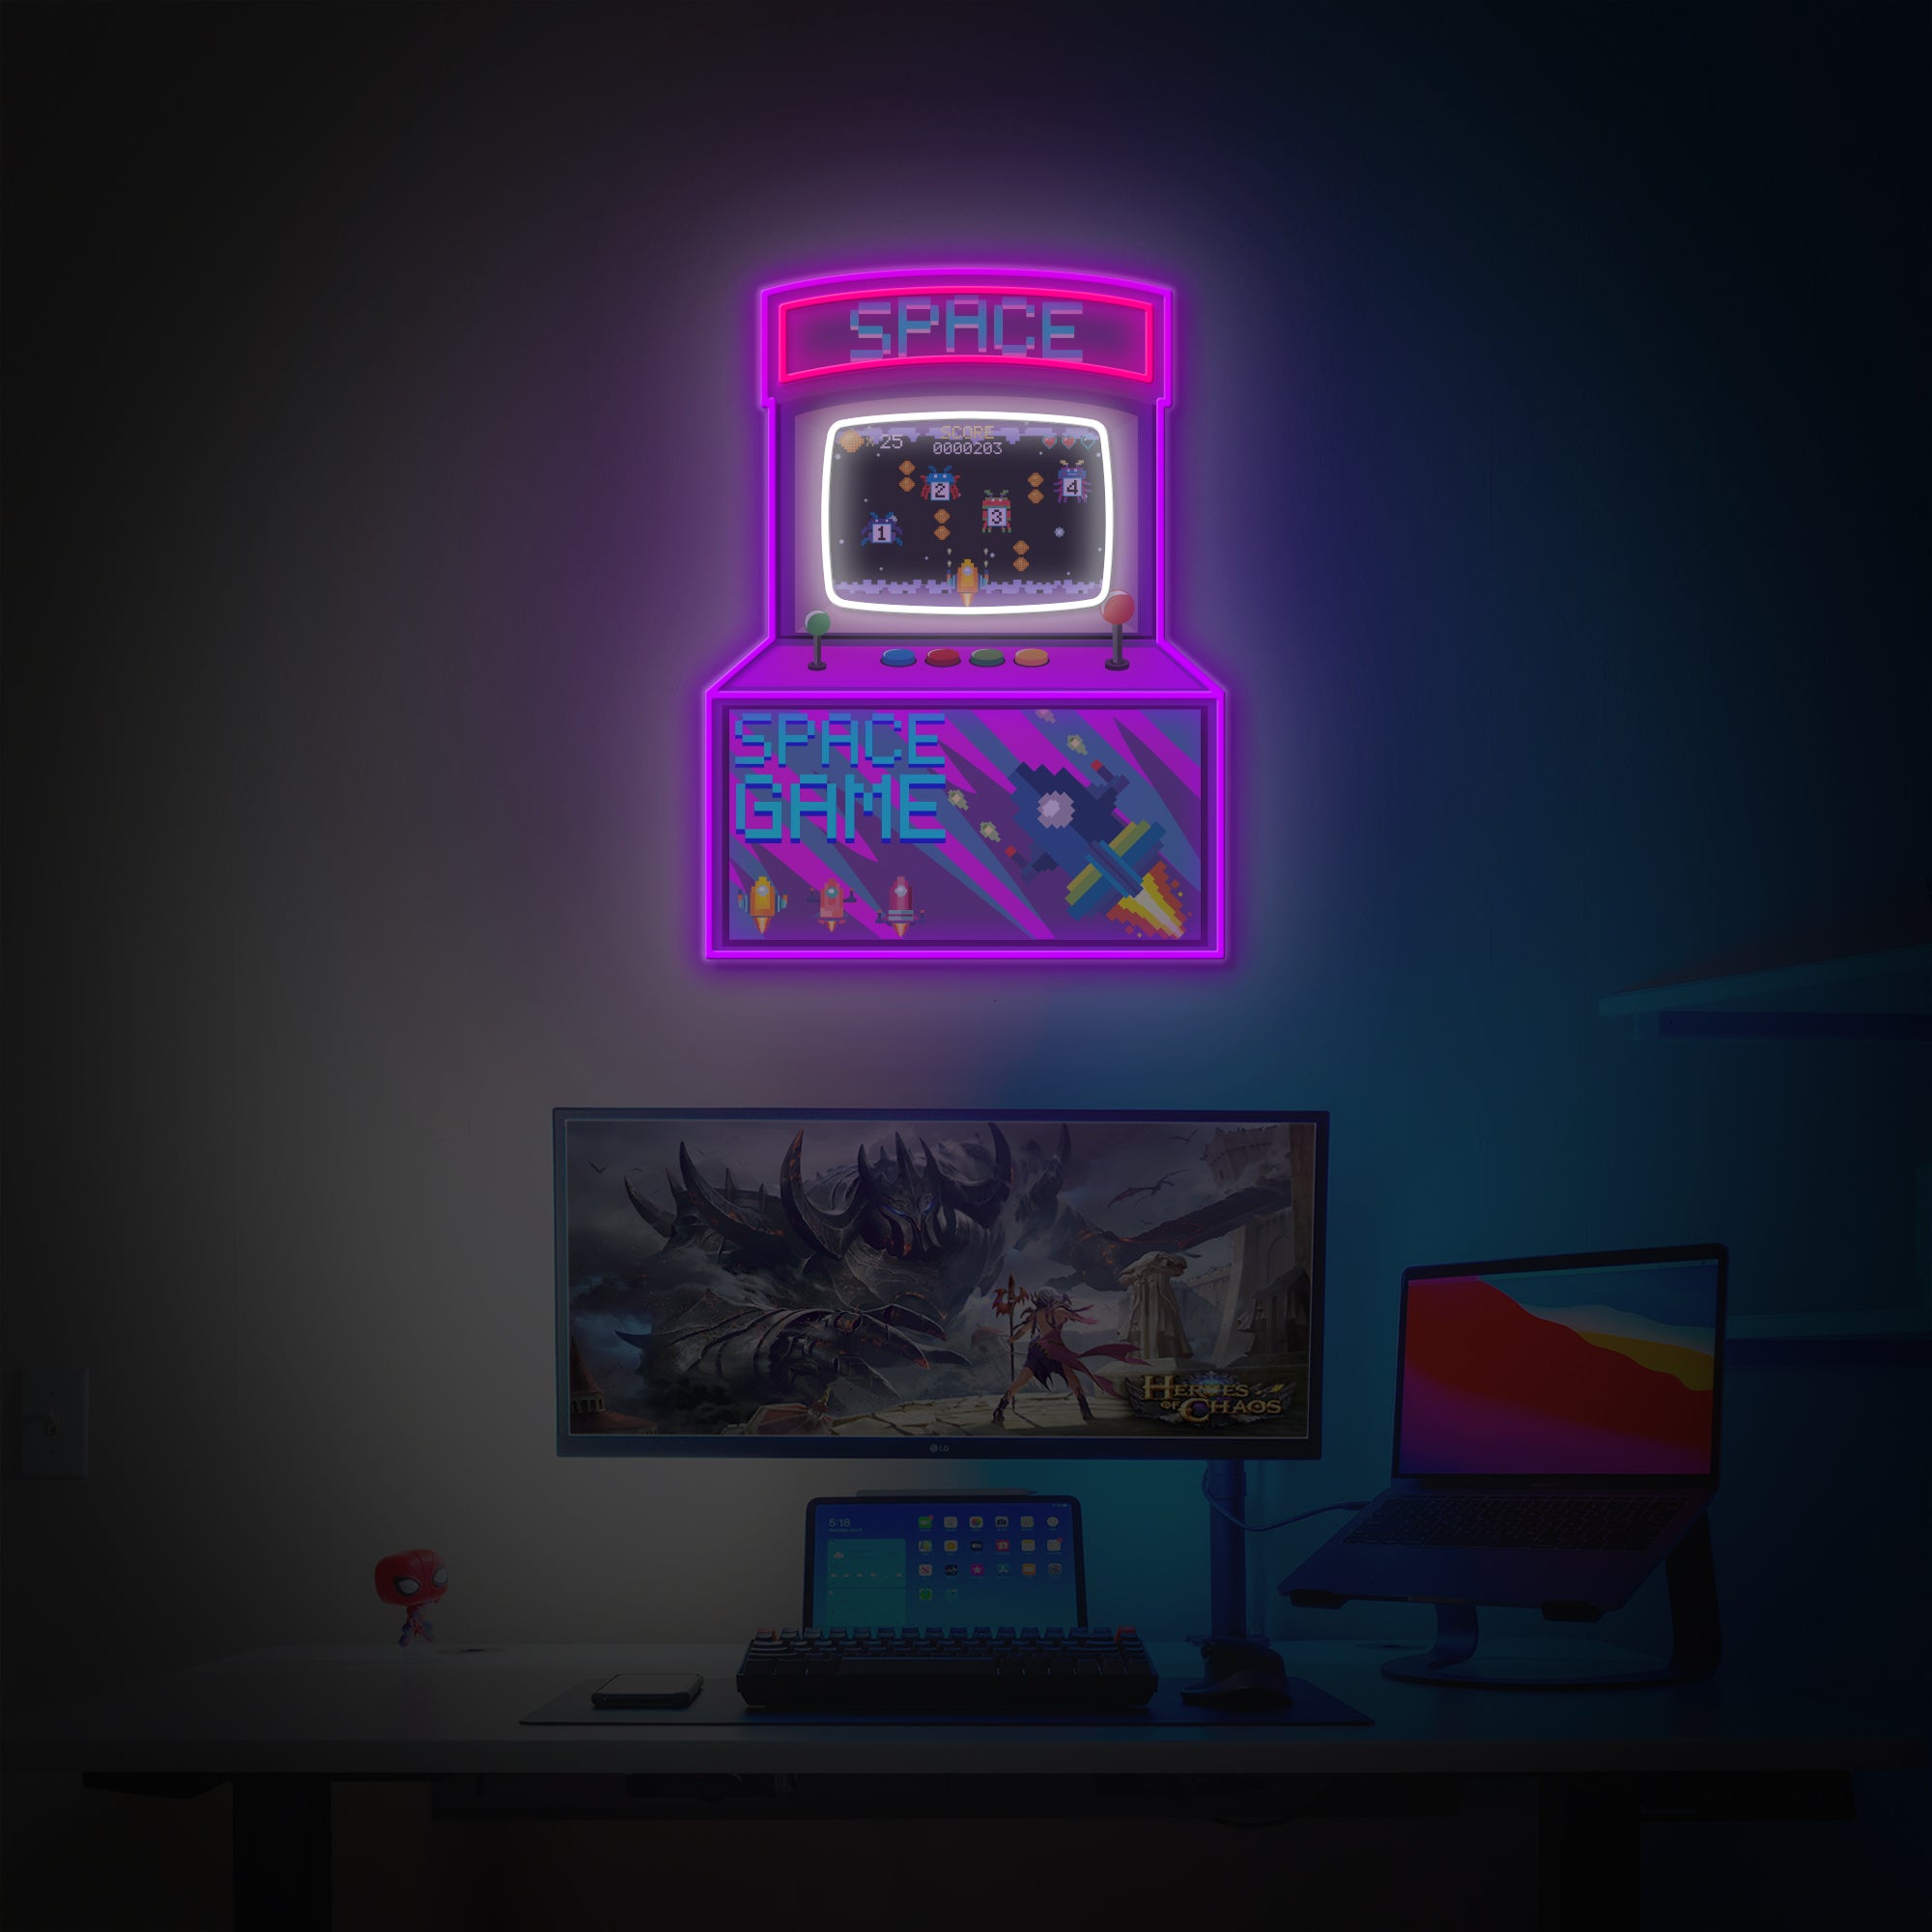 "Arcade Space Game Machine", Game Room Décor, LED Neon Sign 2.0, Luminous UV Printed